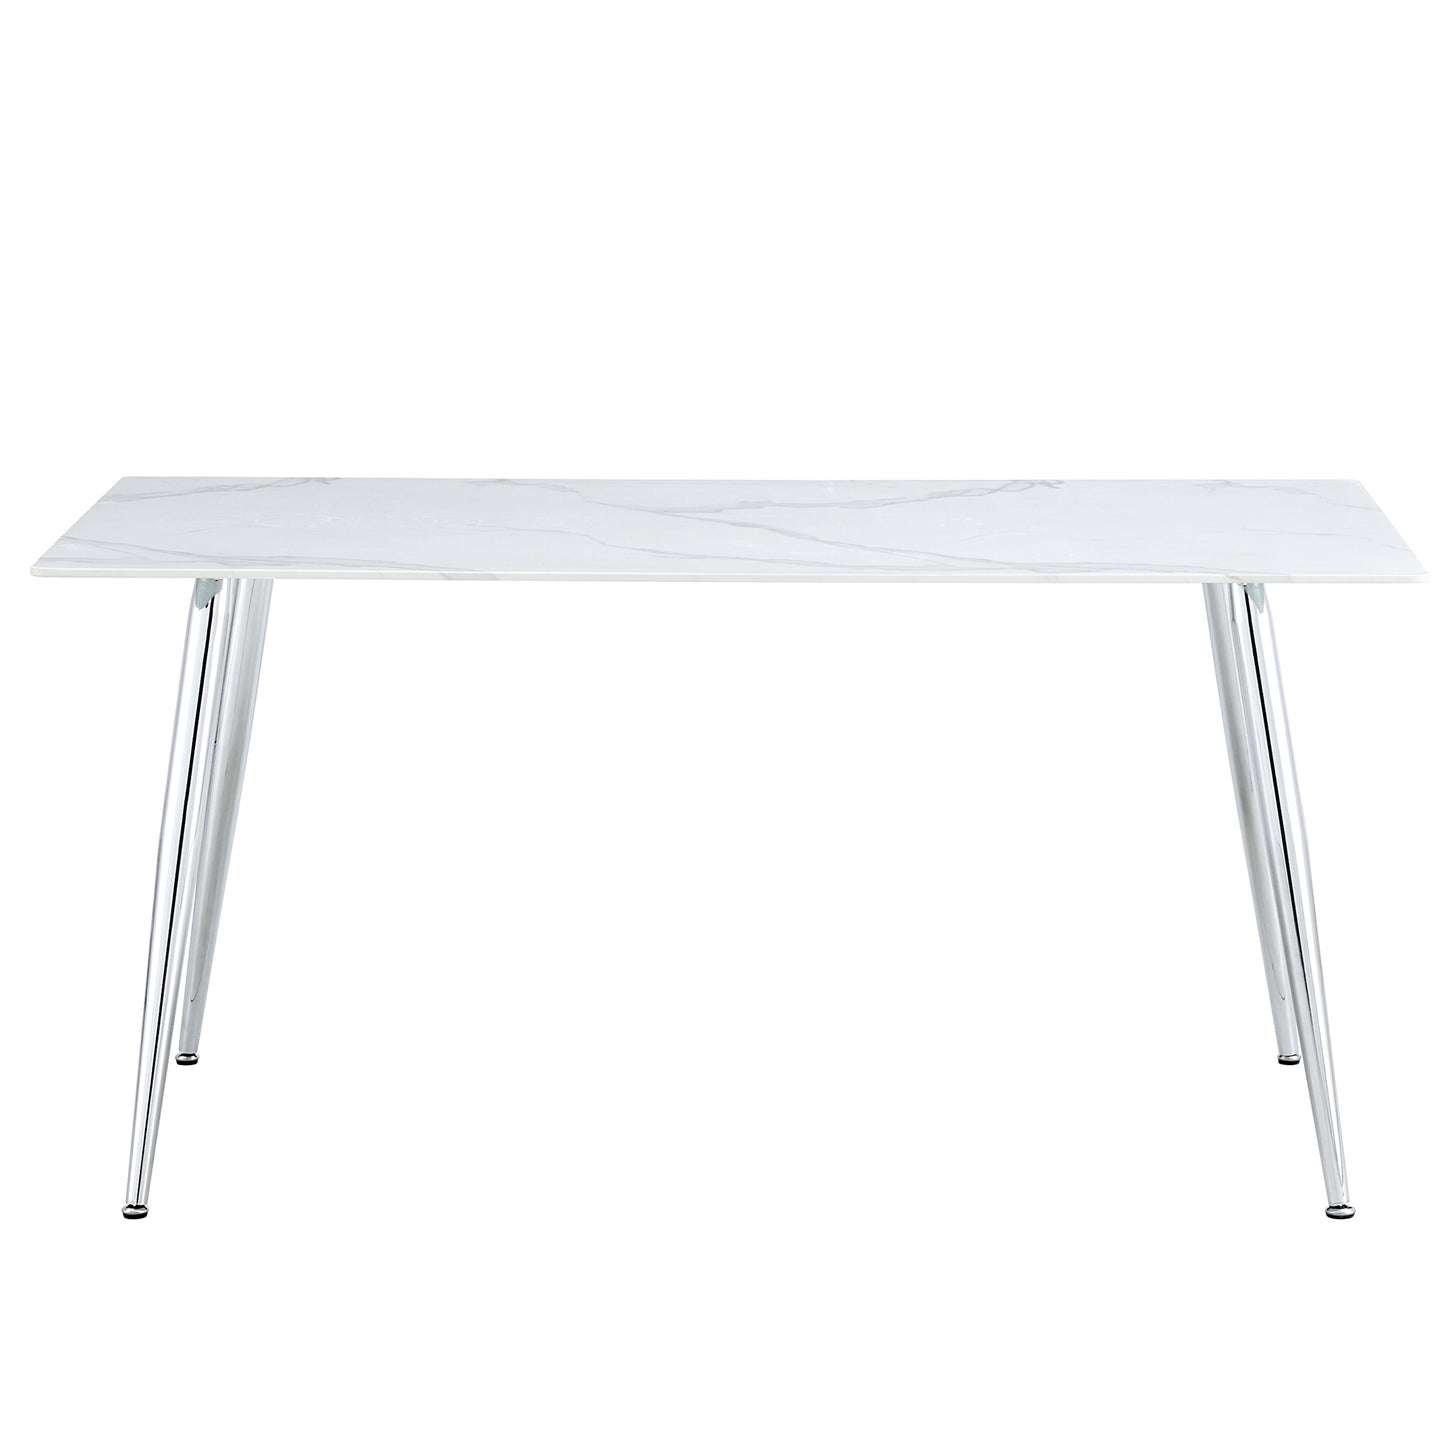 minimalist rectangular dining table with 0.4 inch white imitation marble tabletop